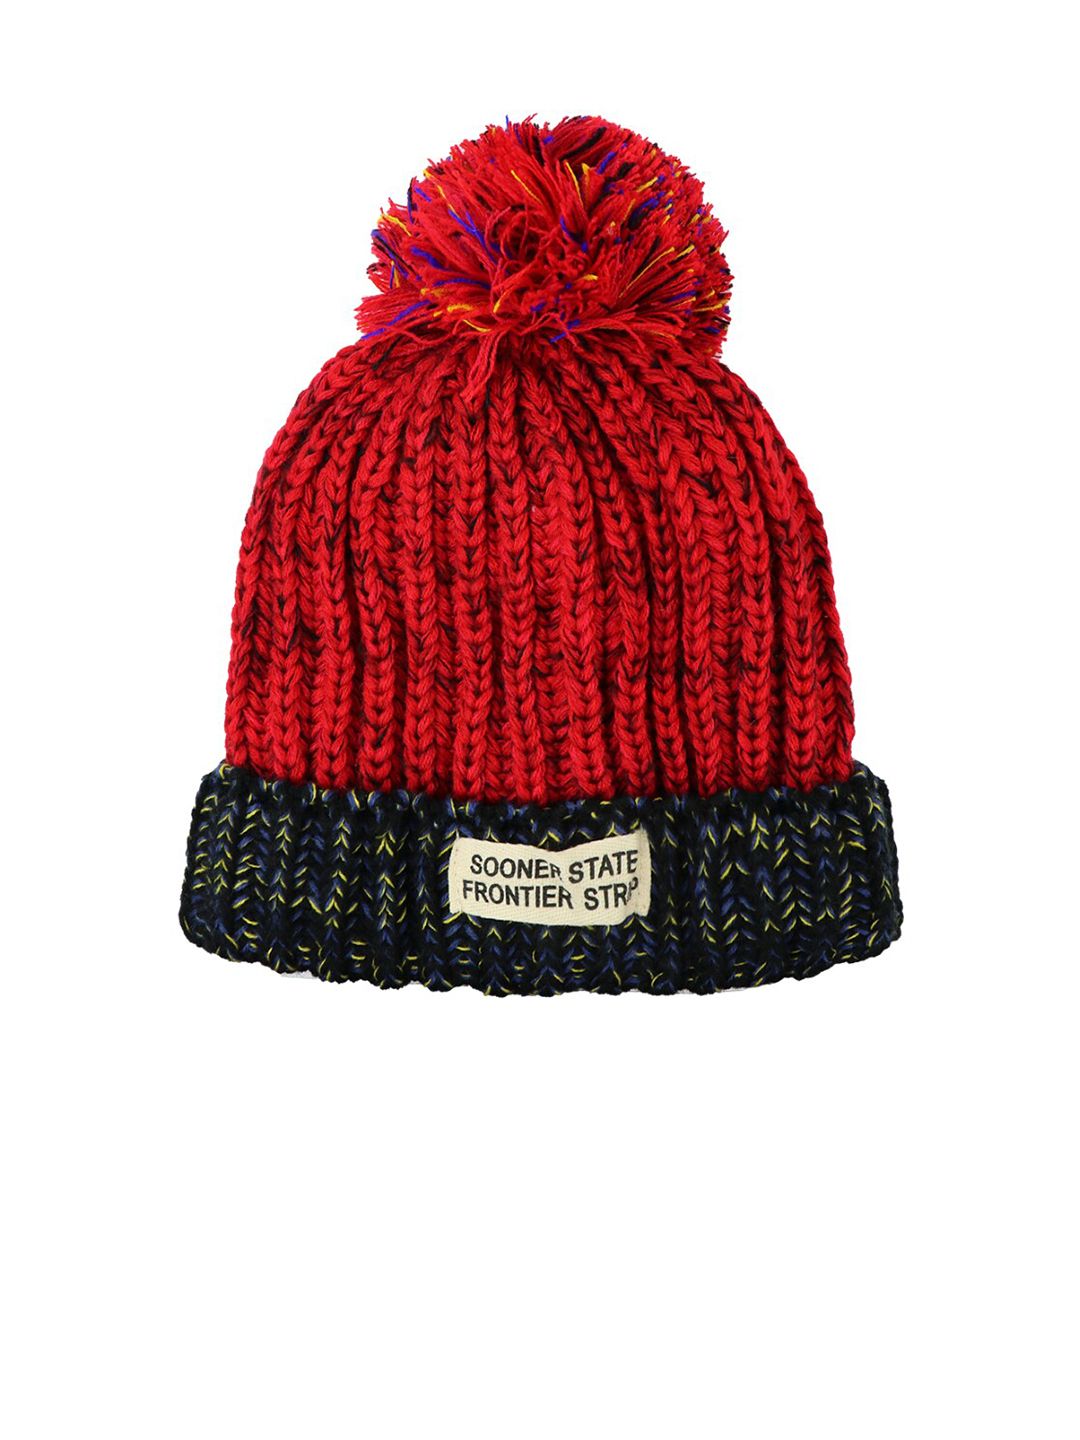 iSWEVEN Unisex Red & Blue Woollen Beanie Cap Price in India